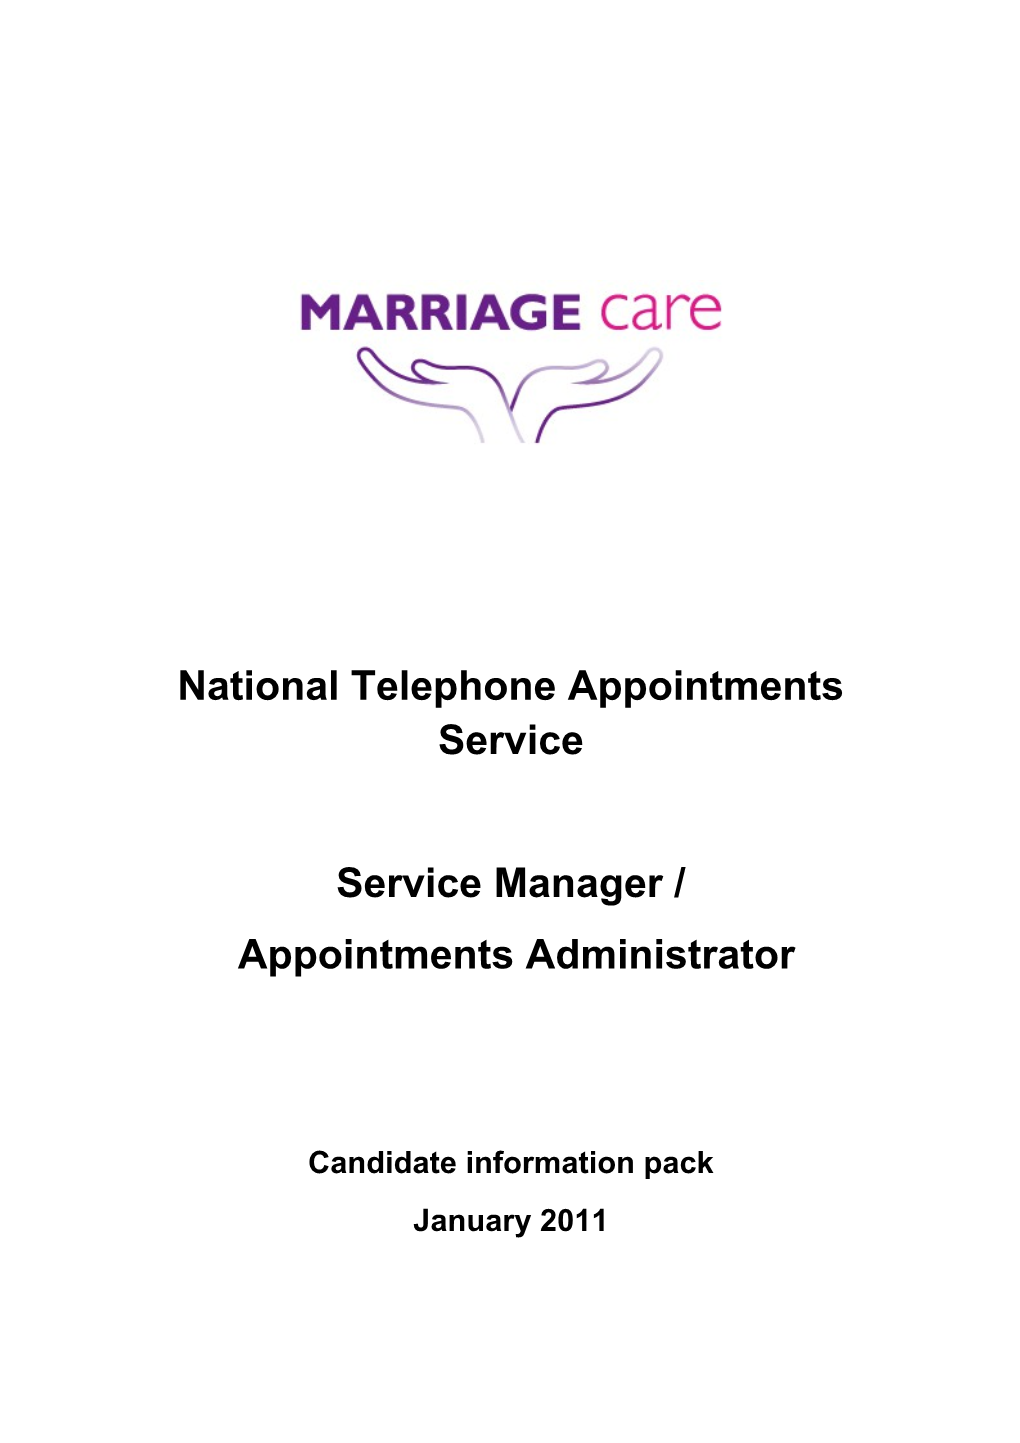 National Telephone Appointments Service